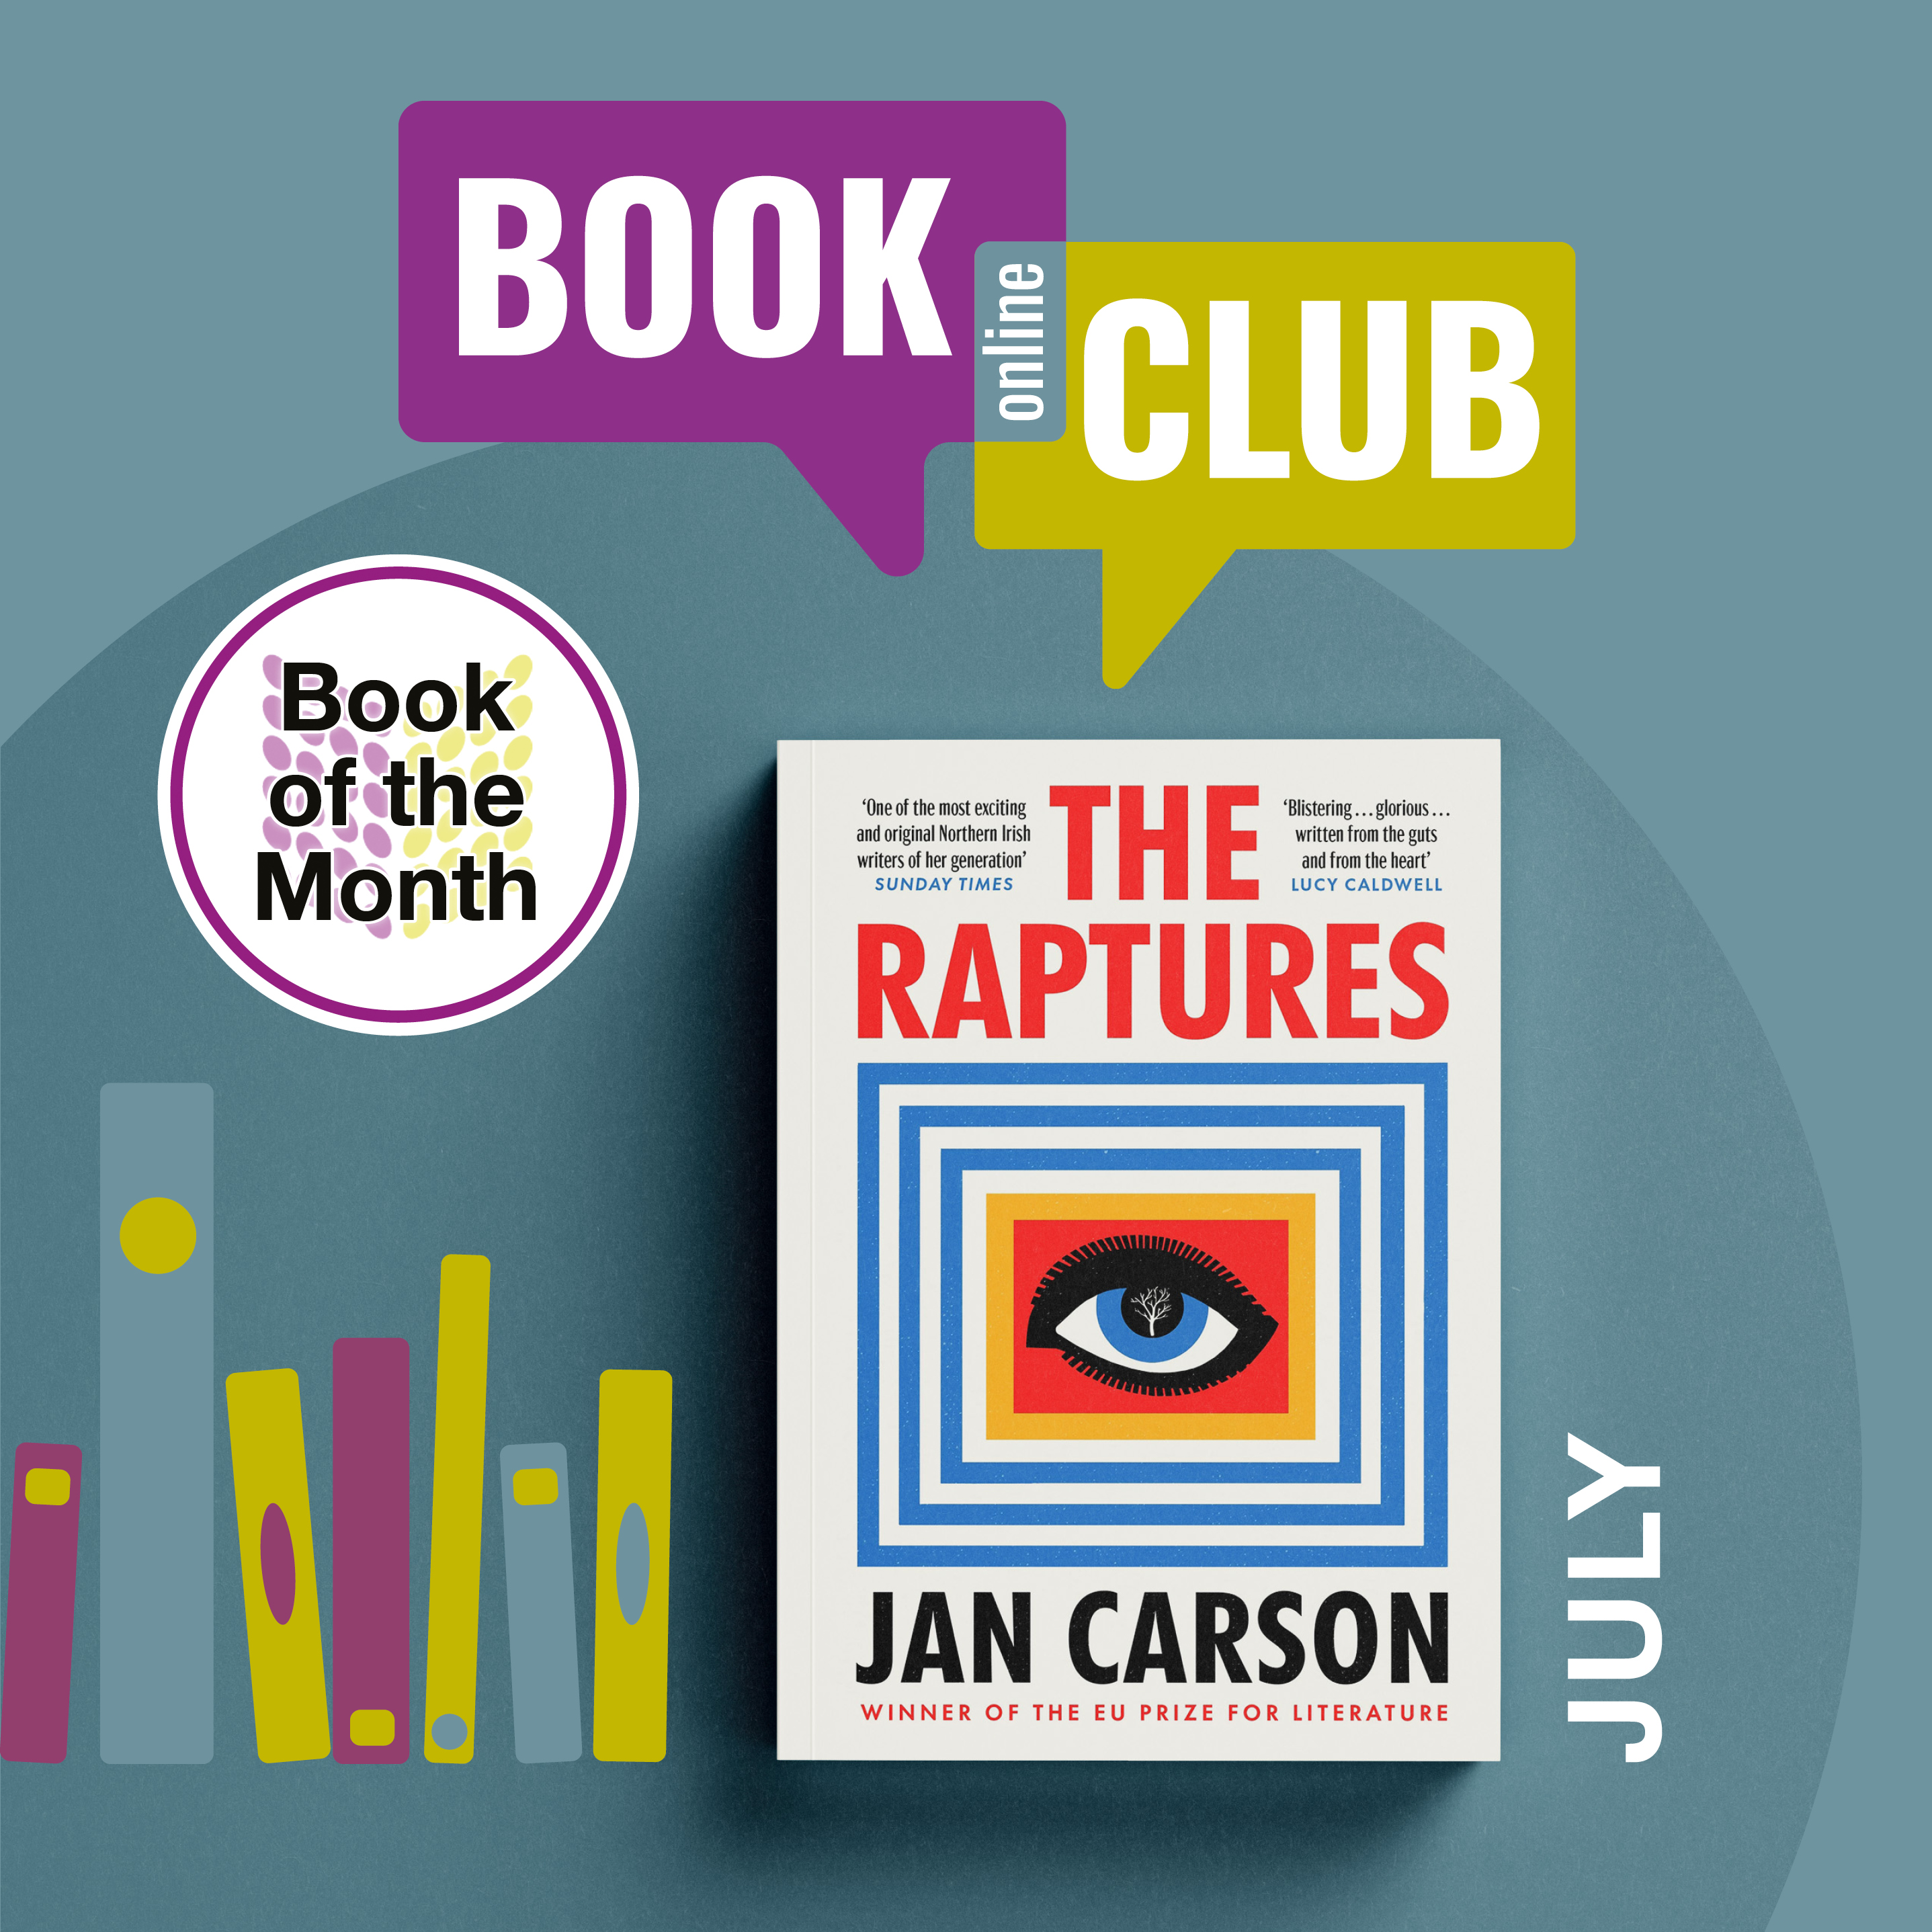 Online Book Club The Raptures by Jan Carson